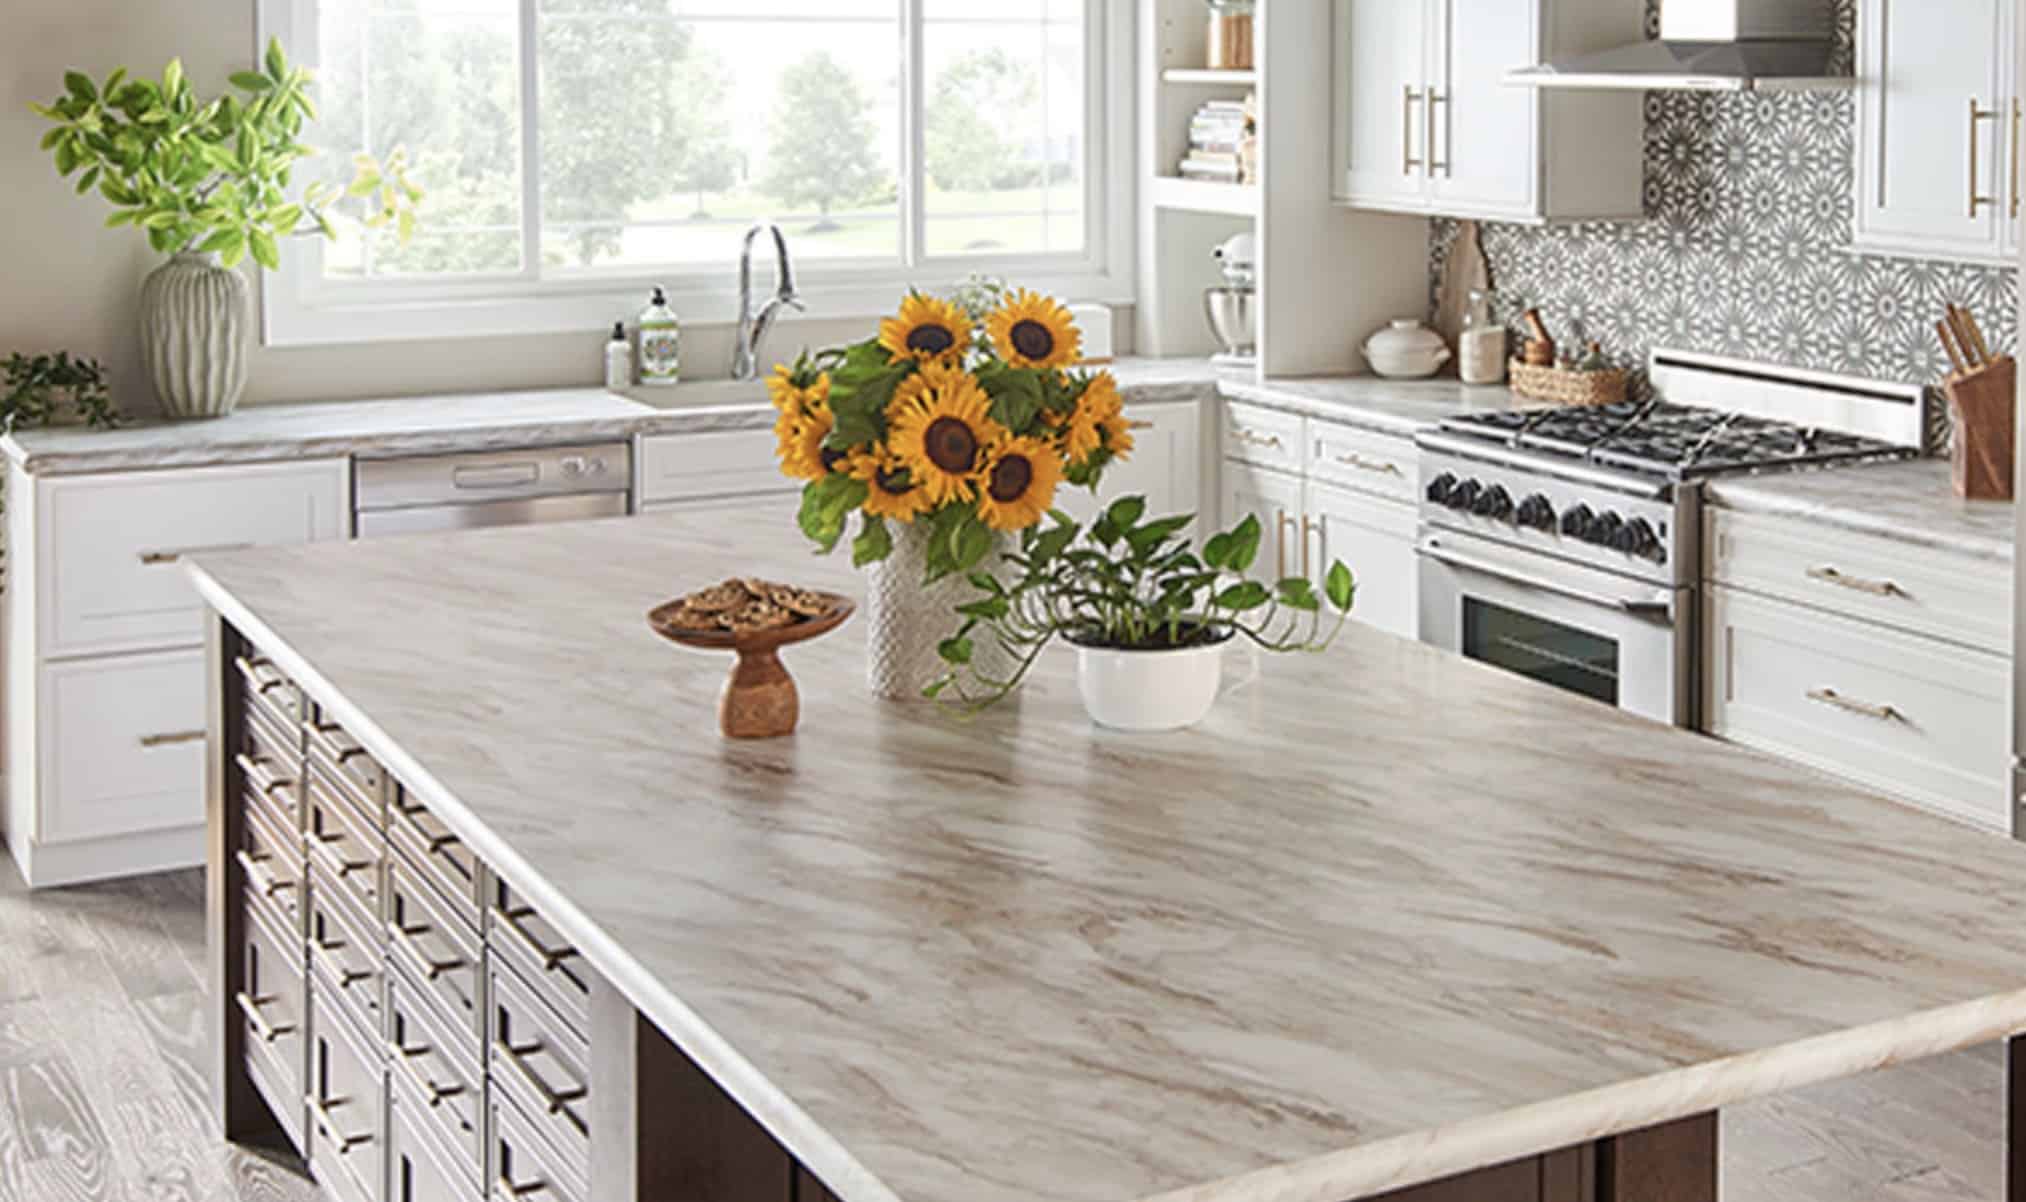 Installing Laminate Countertops, How Much Does It Cost To Install A Laminate Countertop